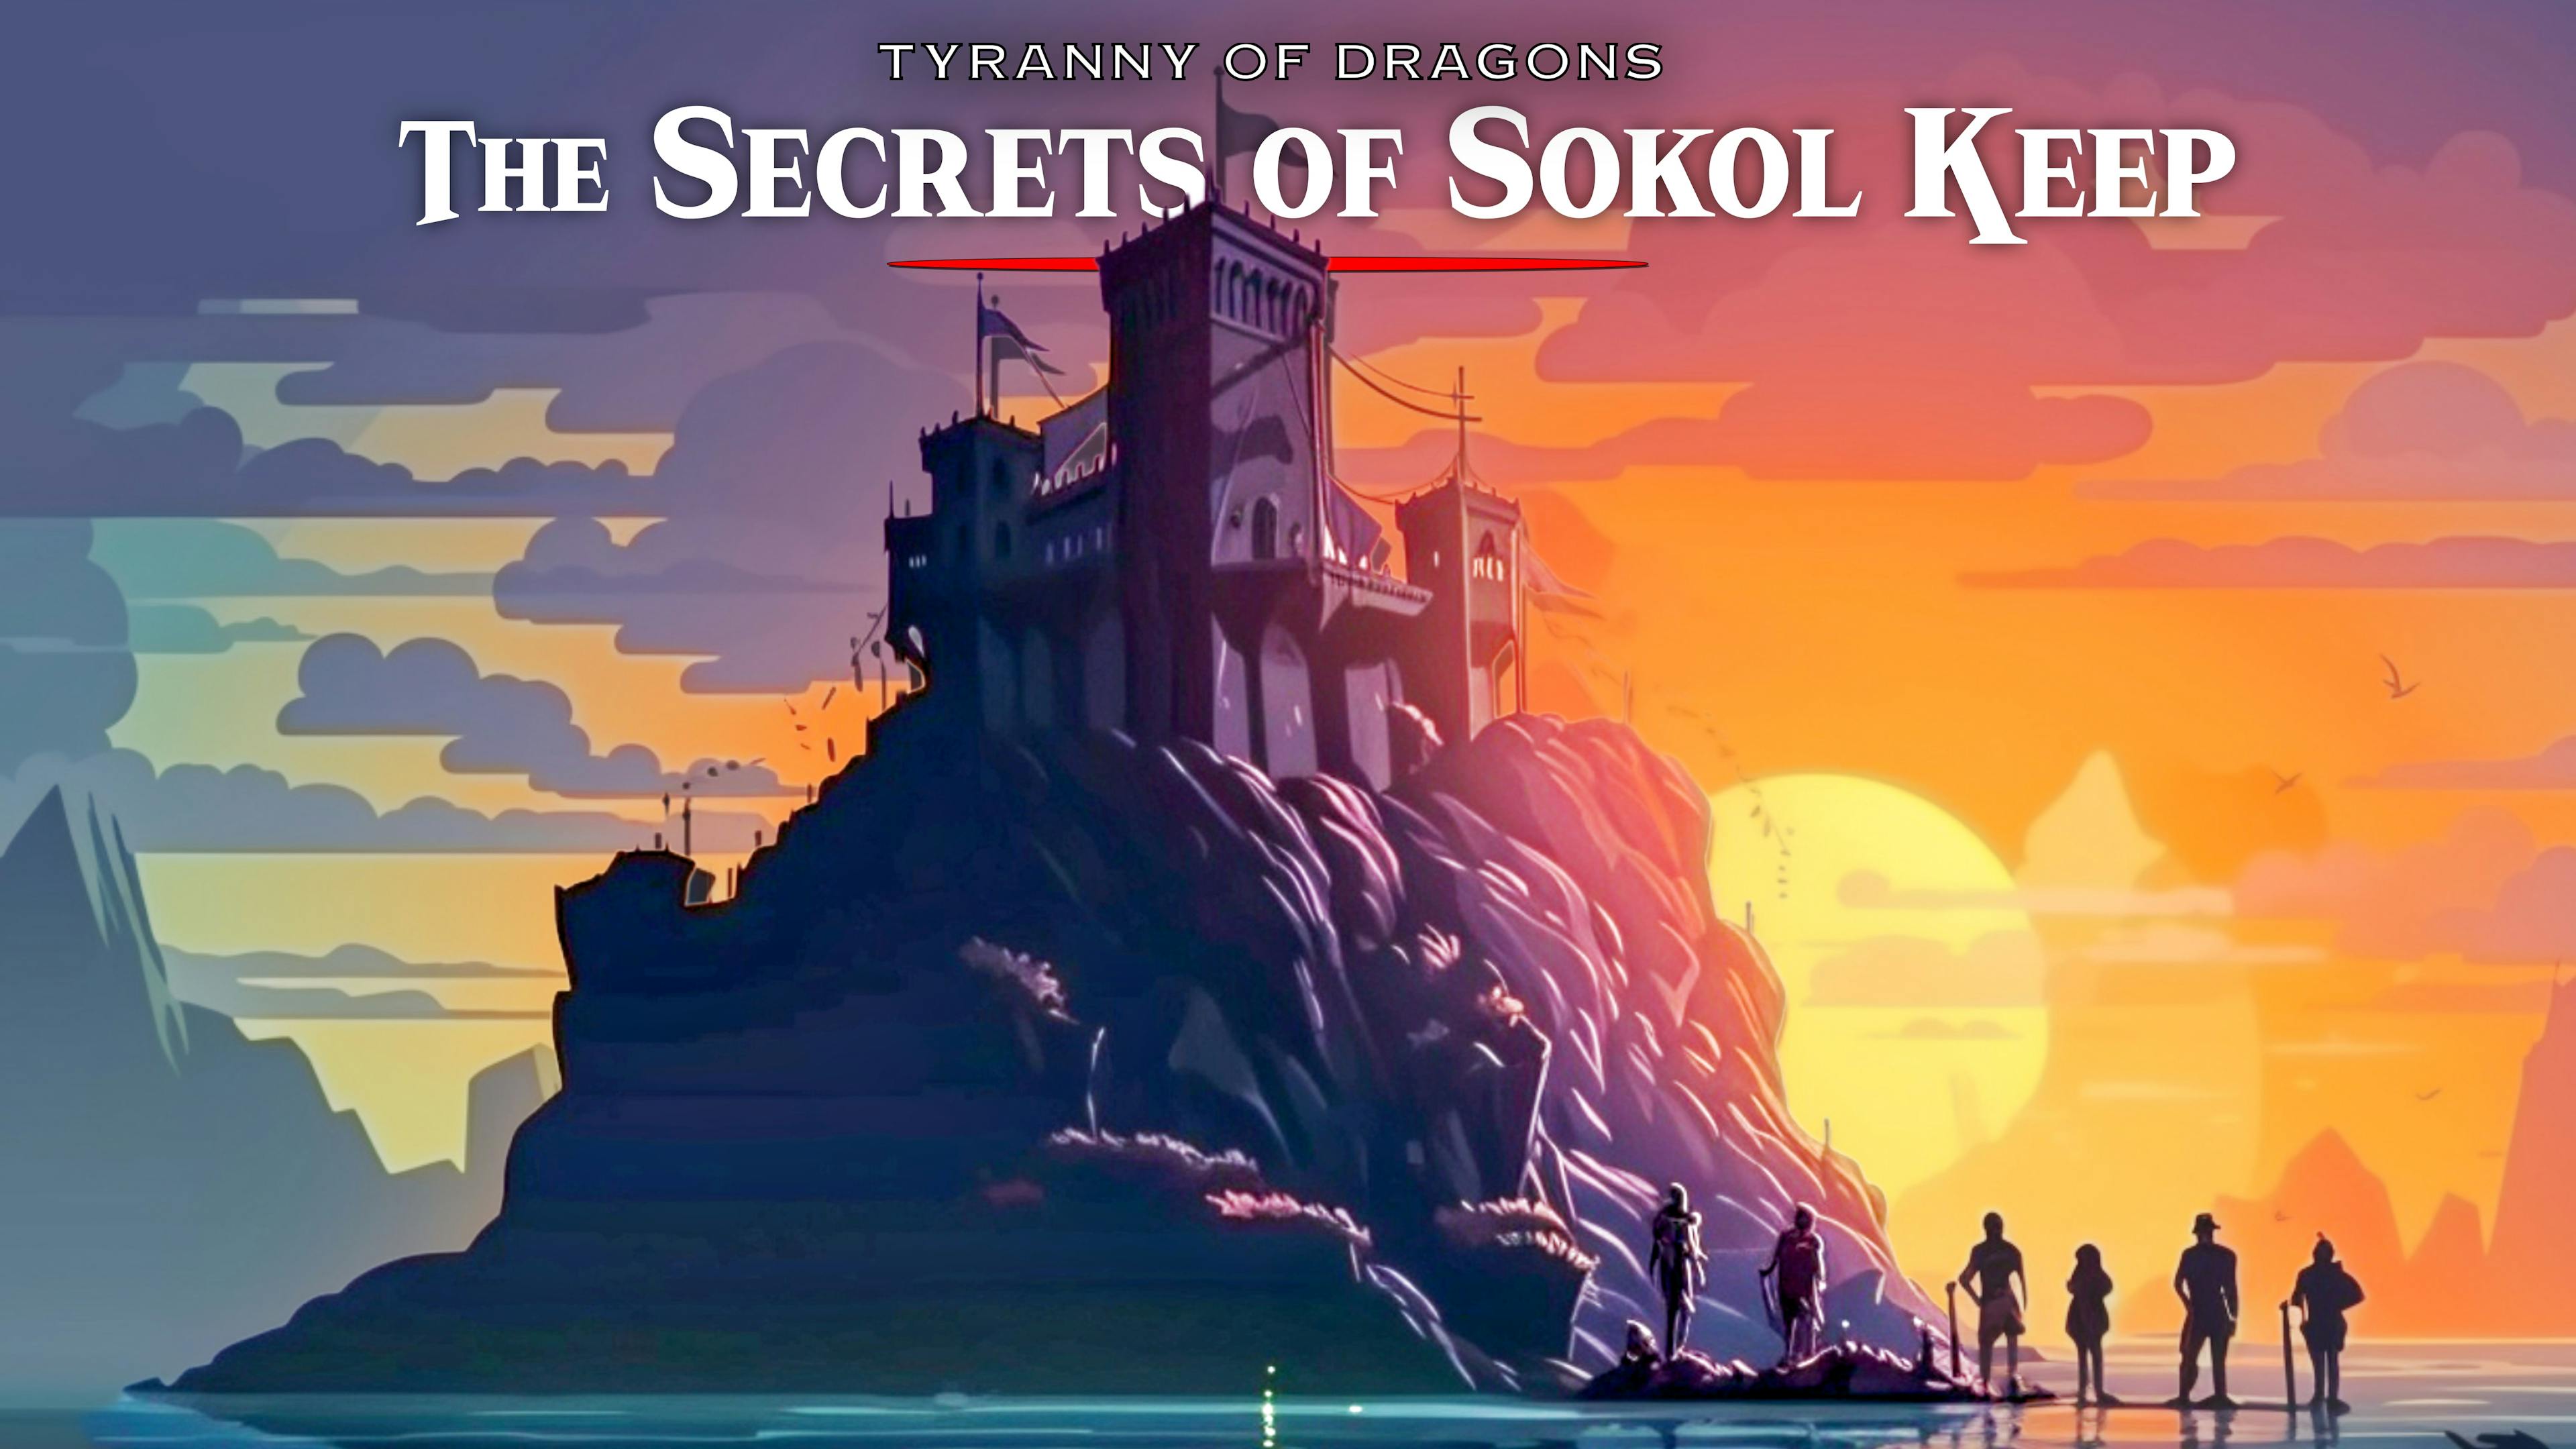 Secrets of Sokol Keep // Face the undead guardians and survive ⚔️ // A subterranean temple of horror // Level 1 One-Shot // Beginners Welcome 💀